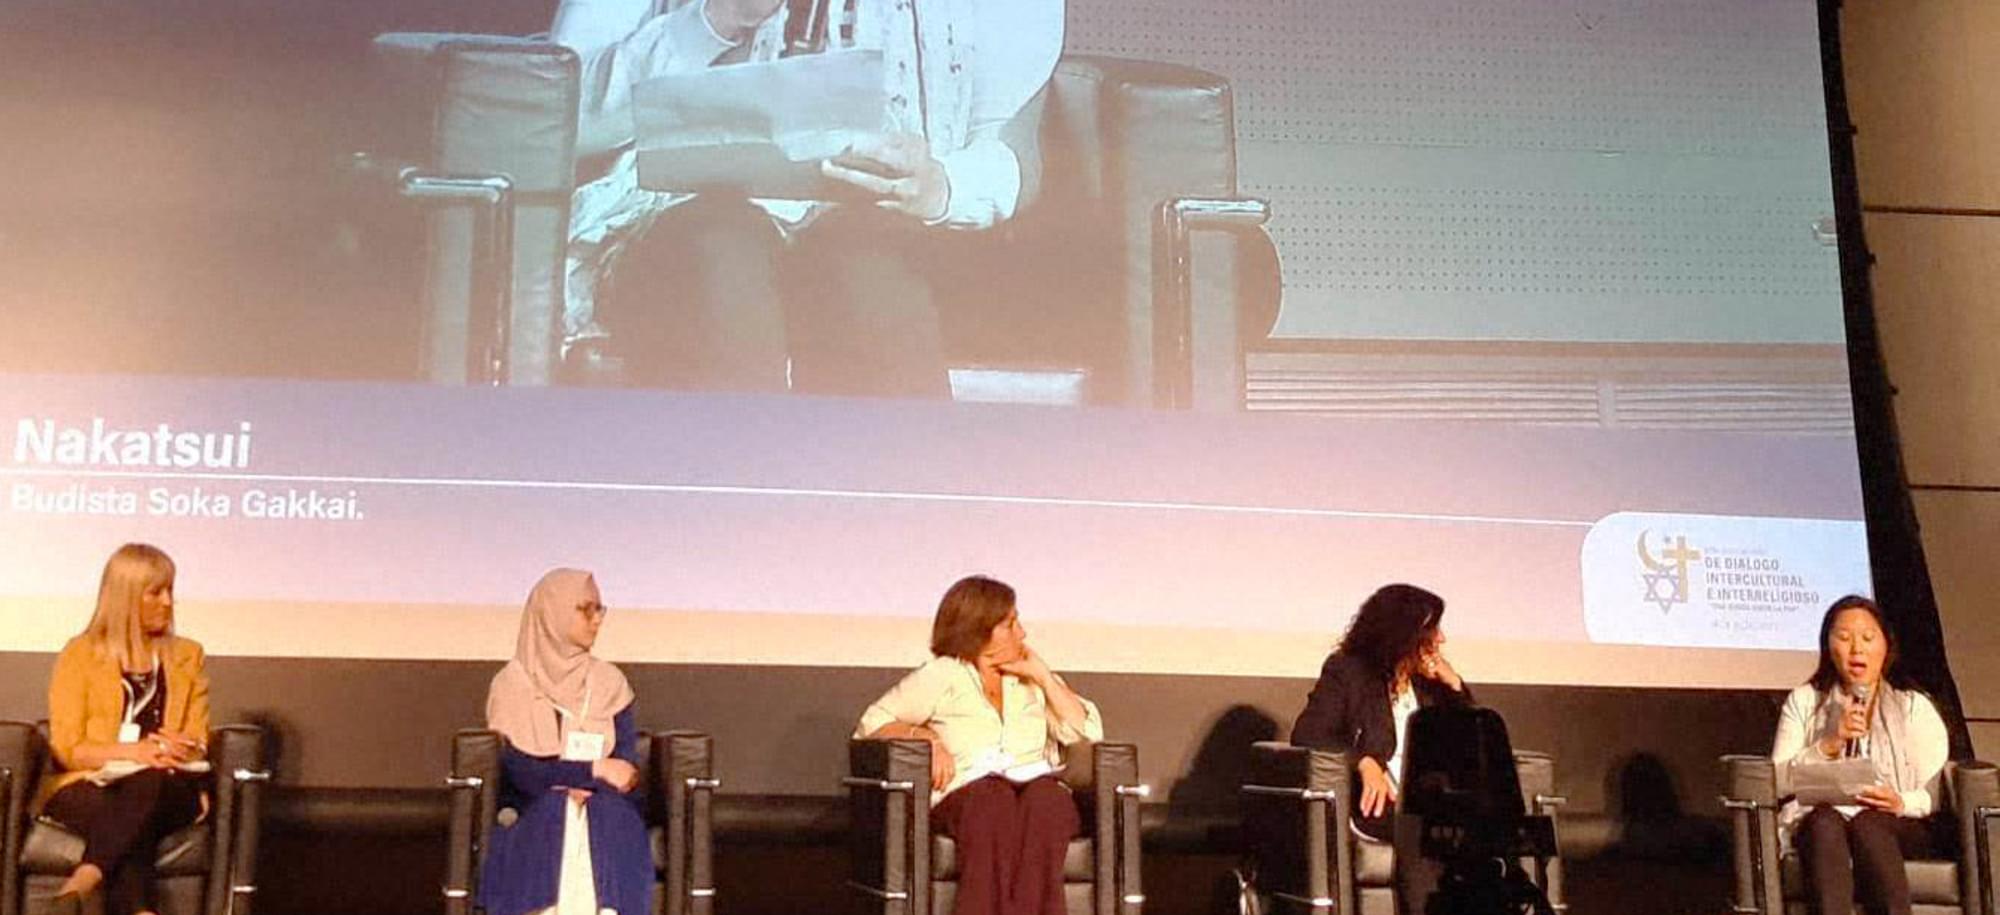 Six female panelists on stage with a backdrop of the person speaking.